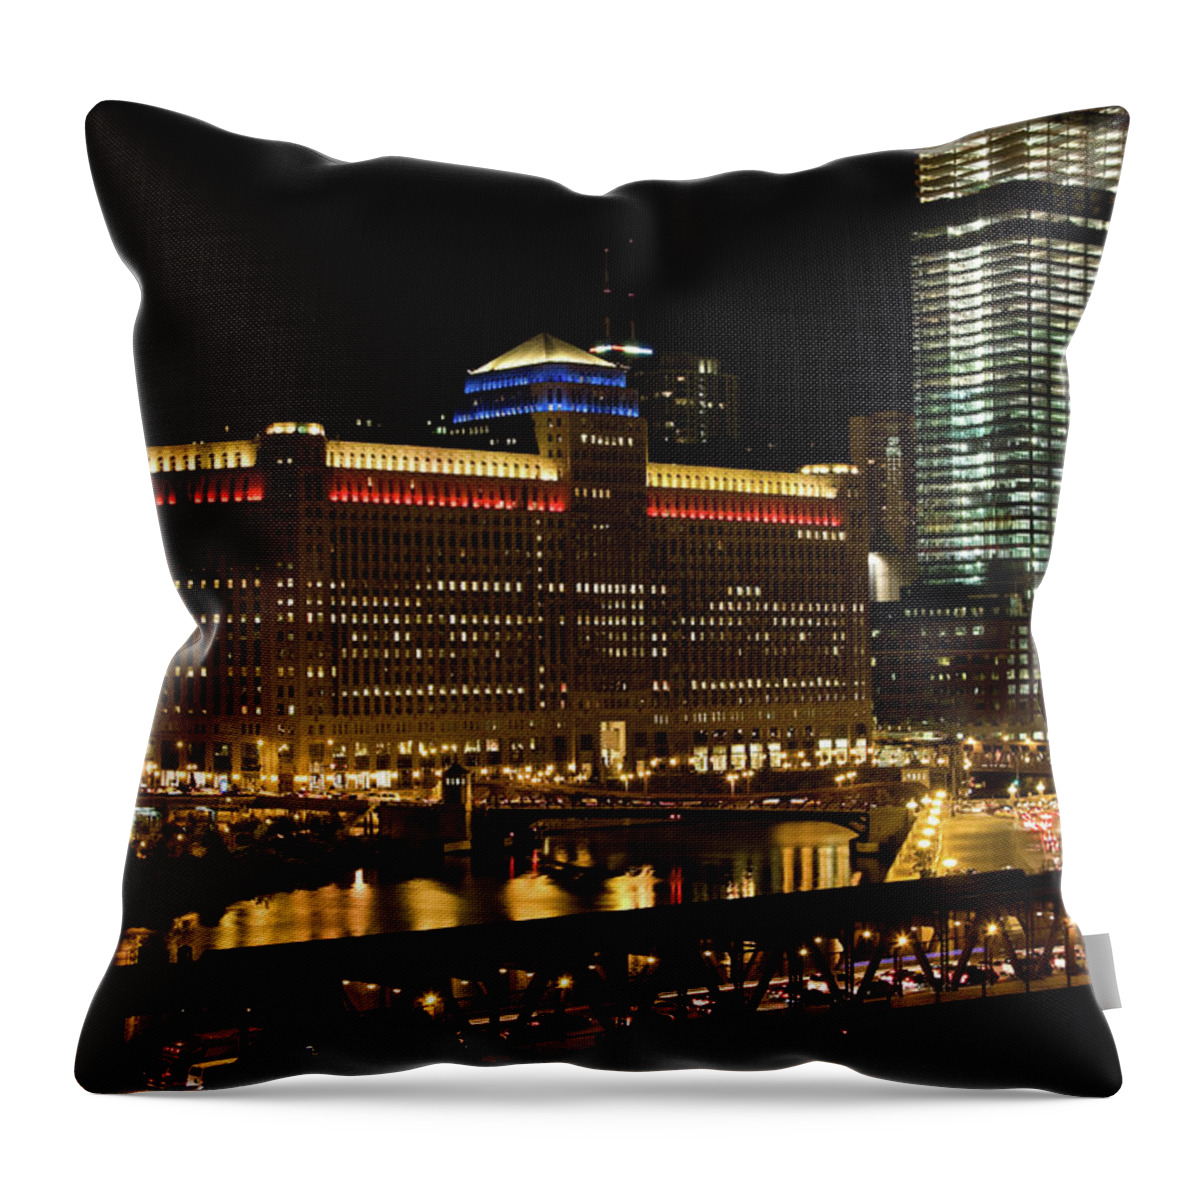 Chicago River Throw Pillow featuring the photograph Chicago Merchandise Mart by Helpinghandphotos